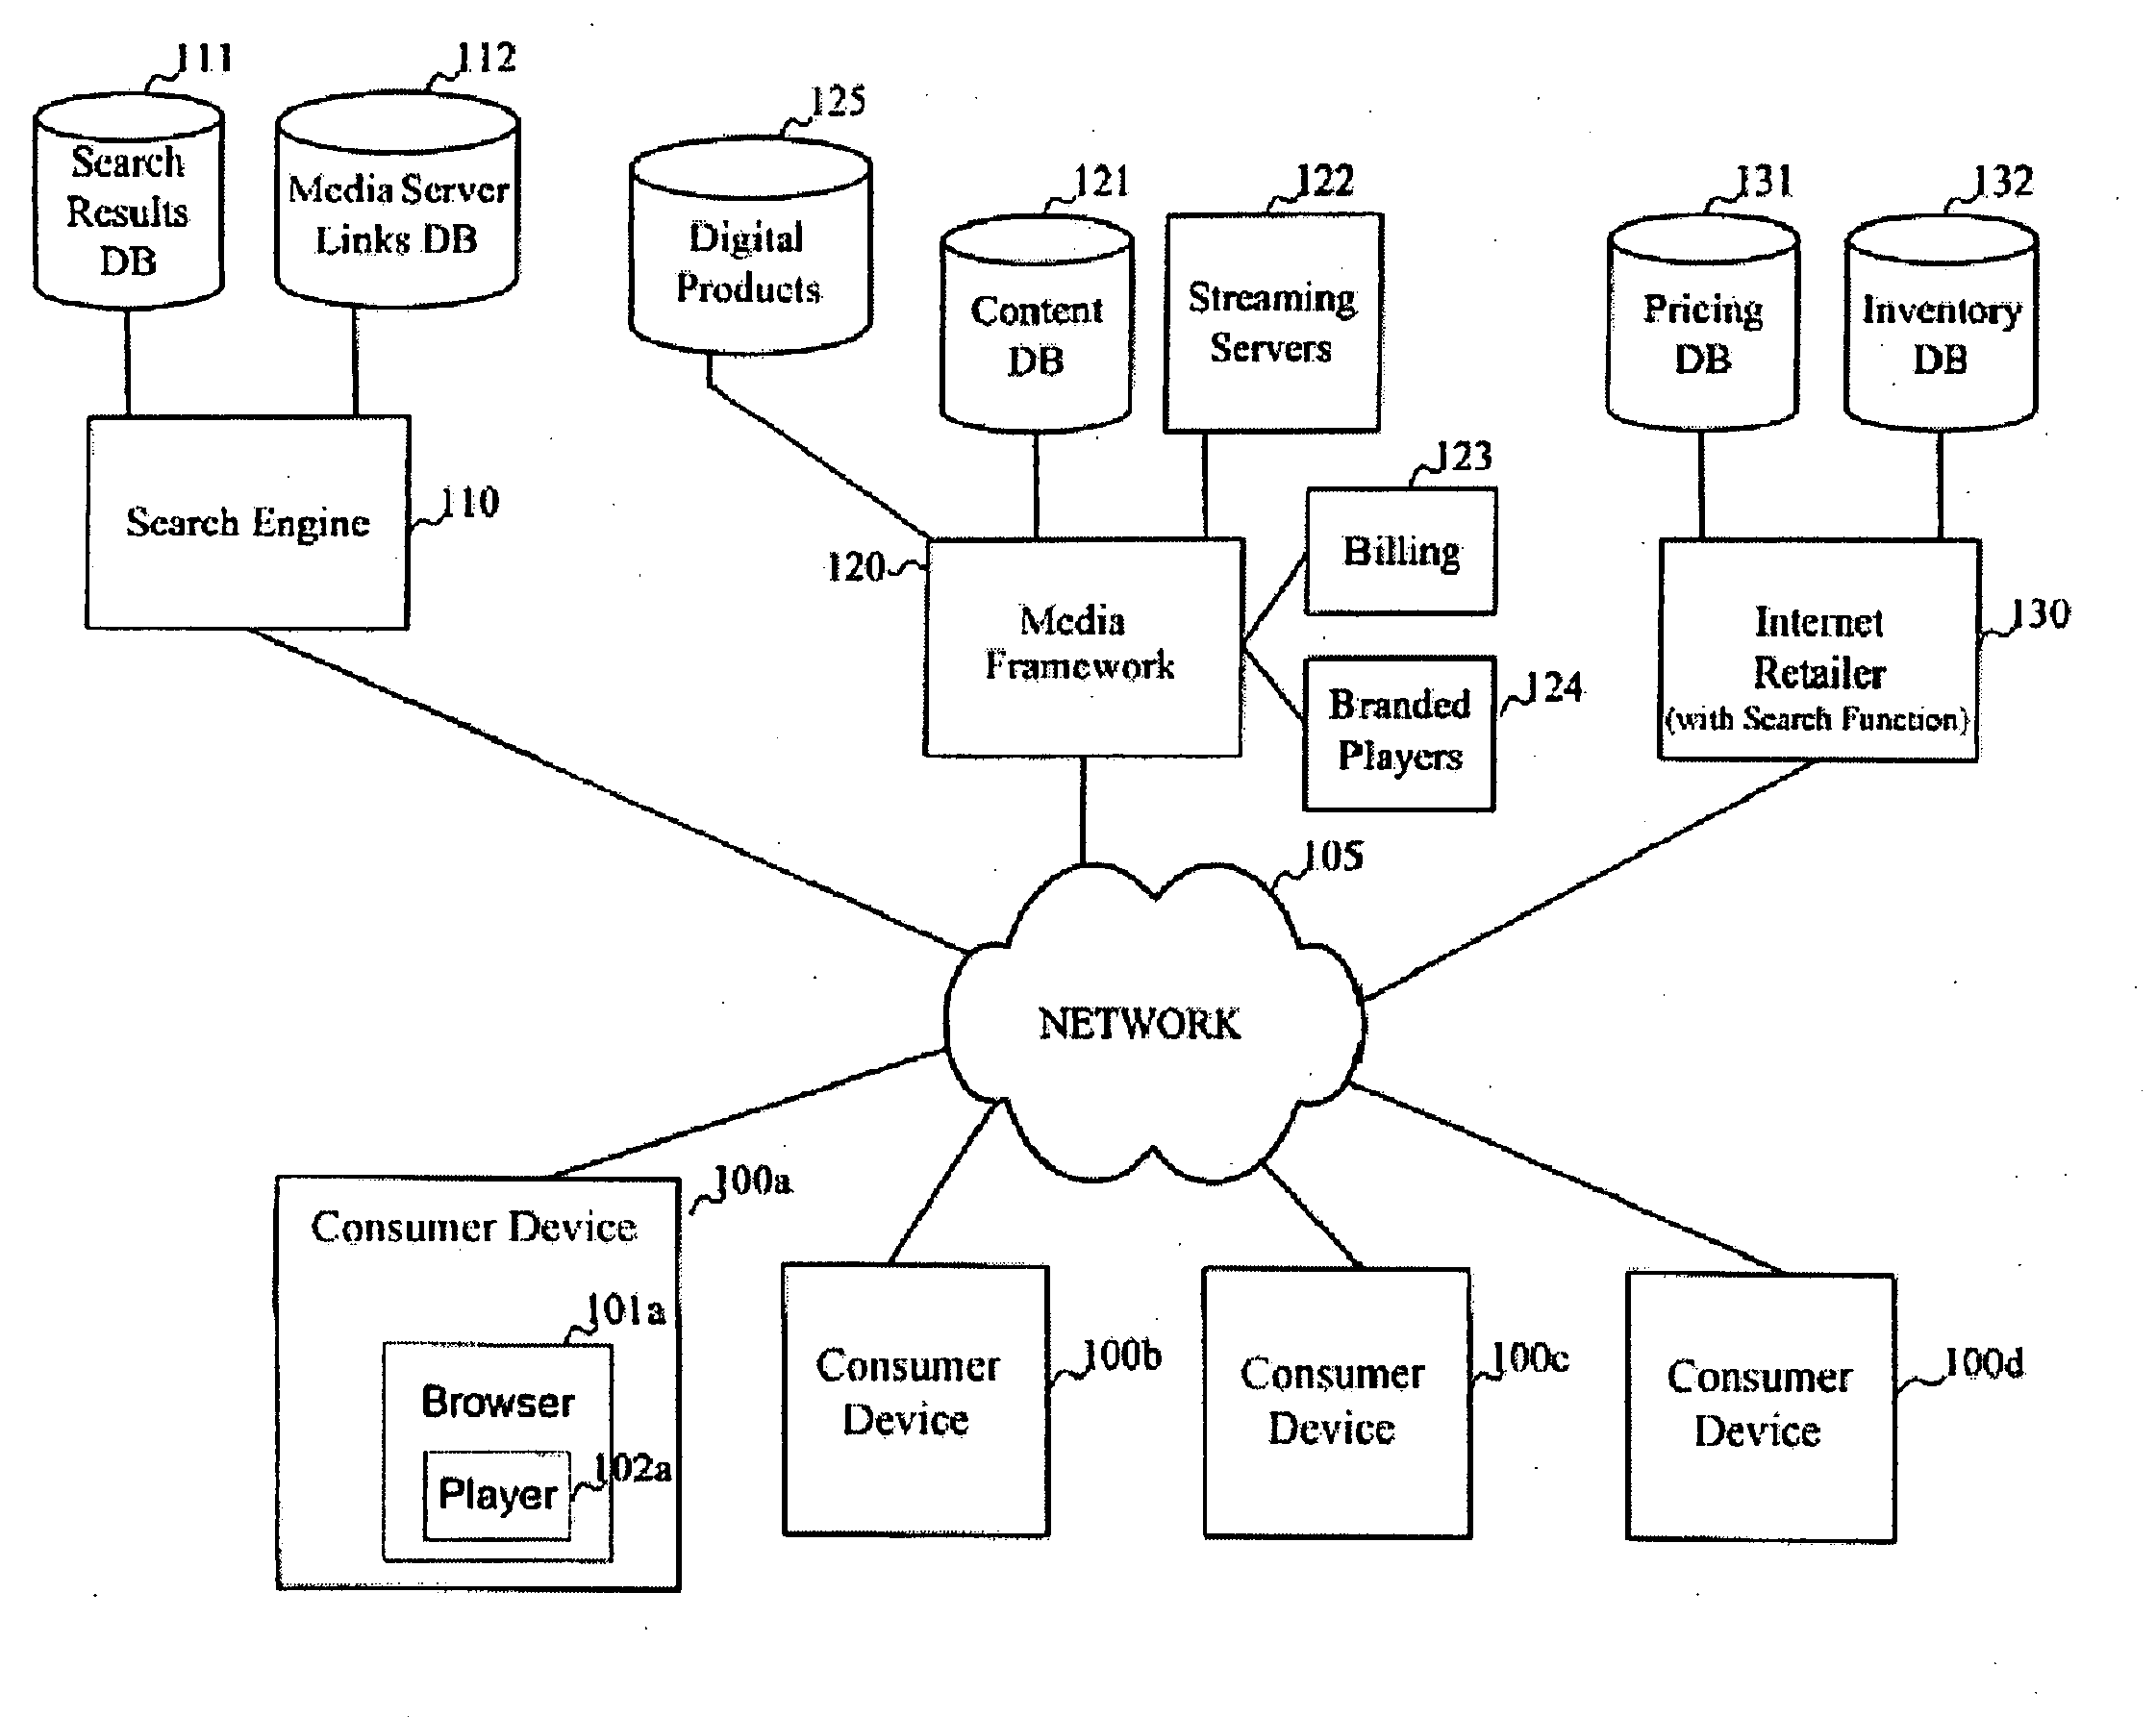 System and method for providing media samples on-line in response to media related searches on the Internet